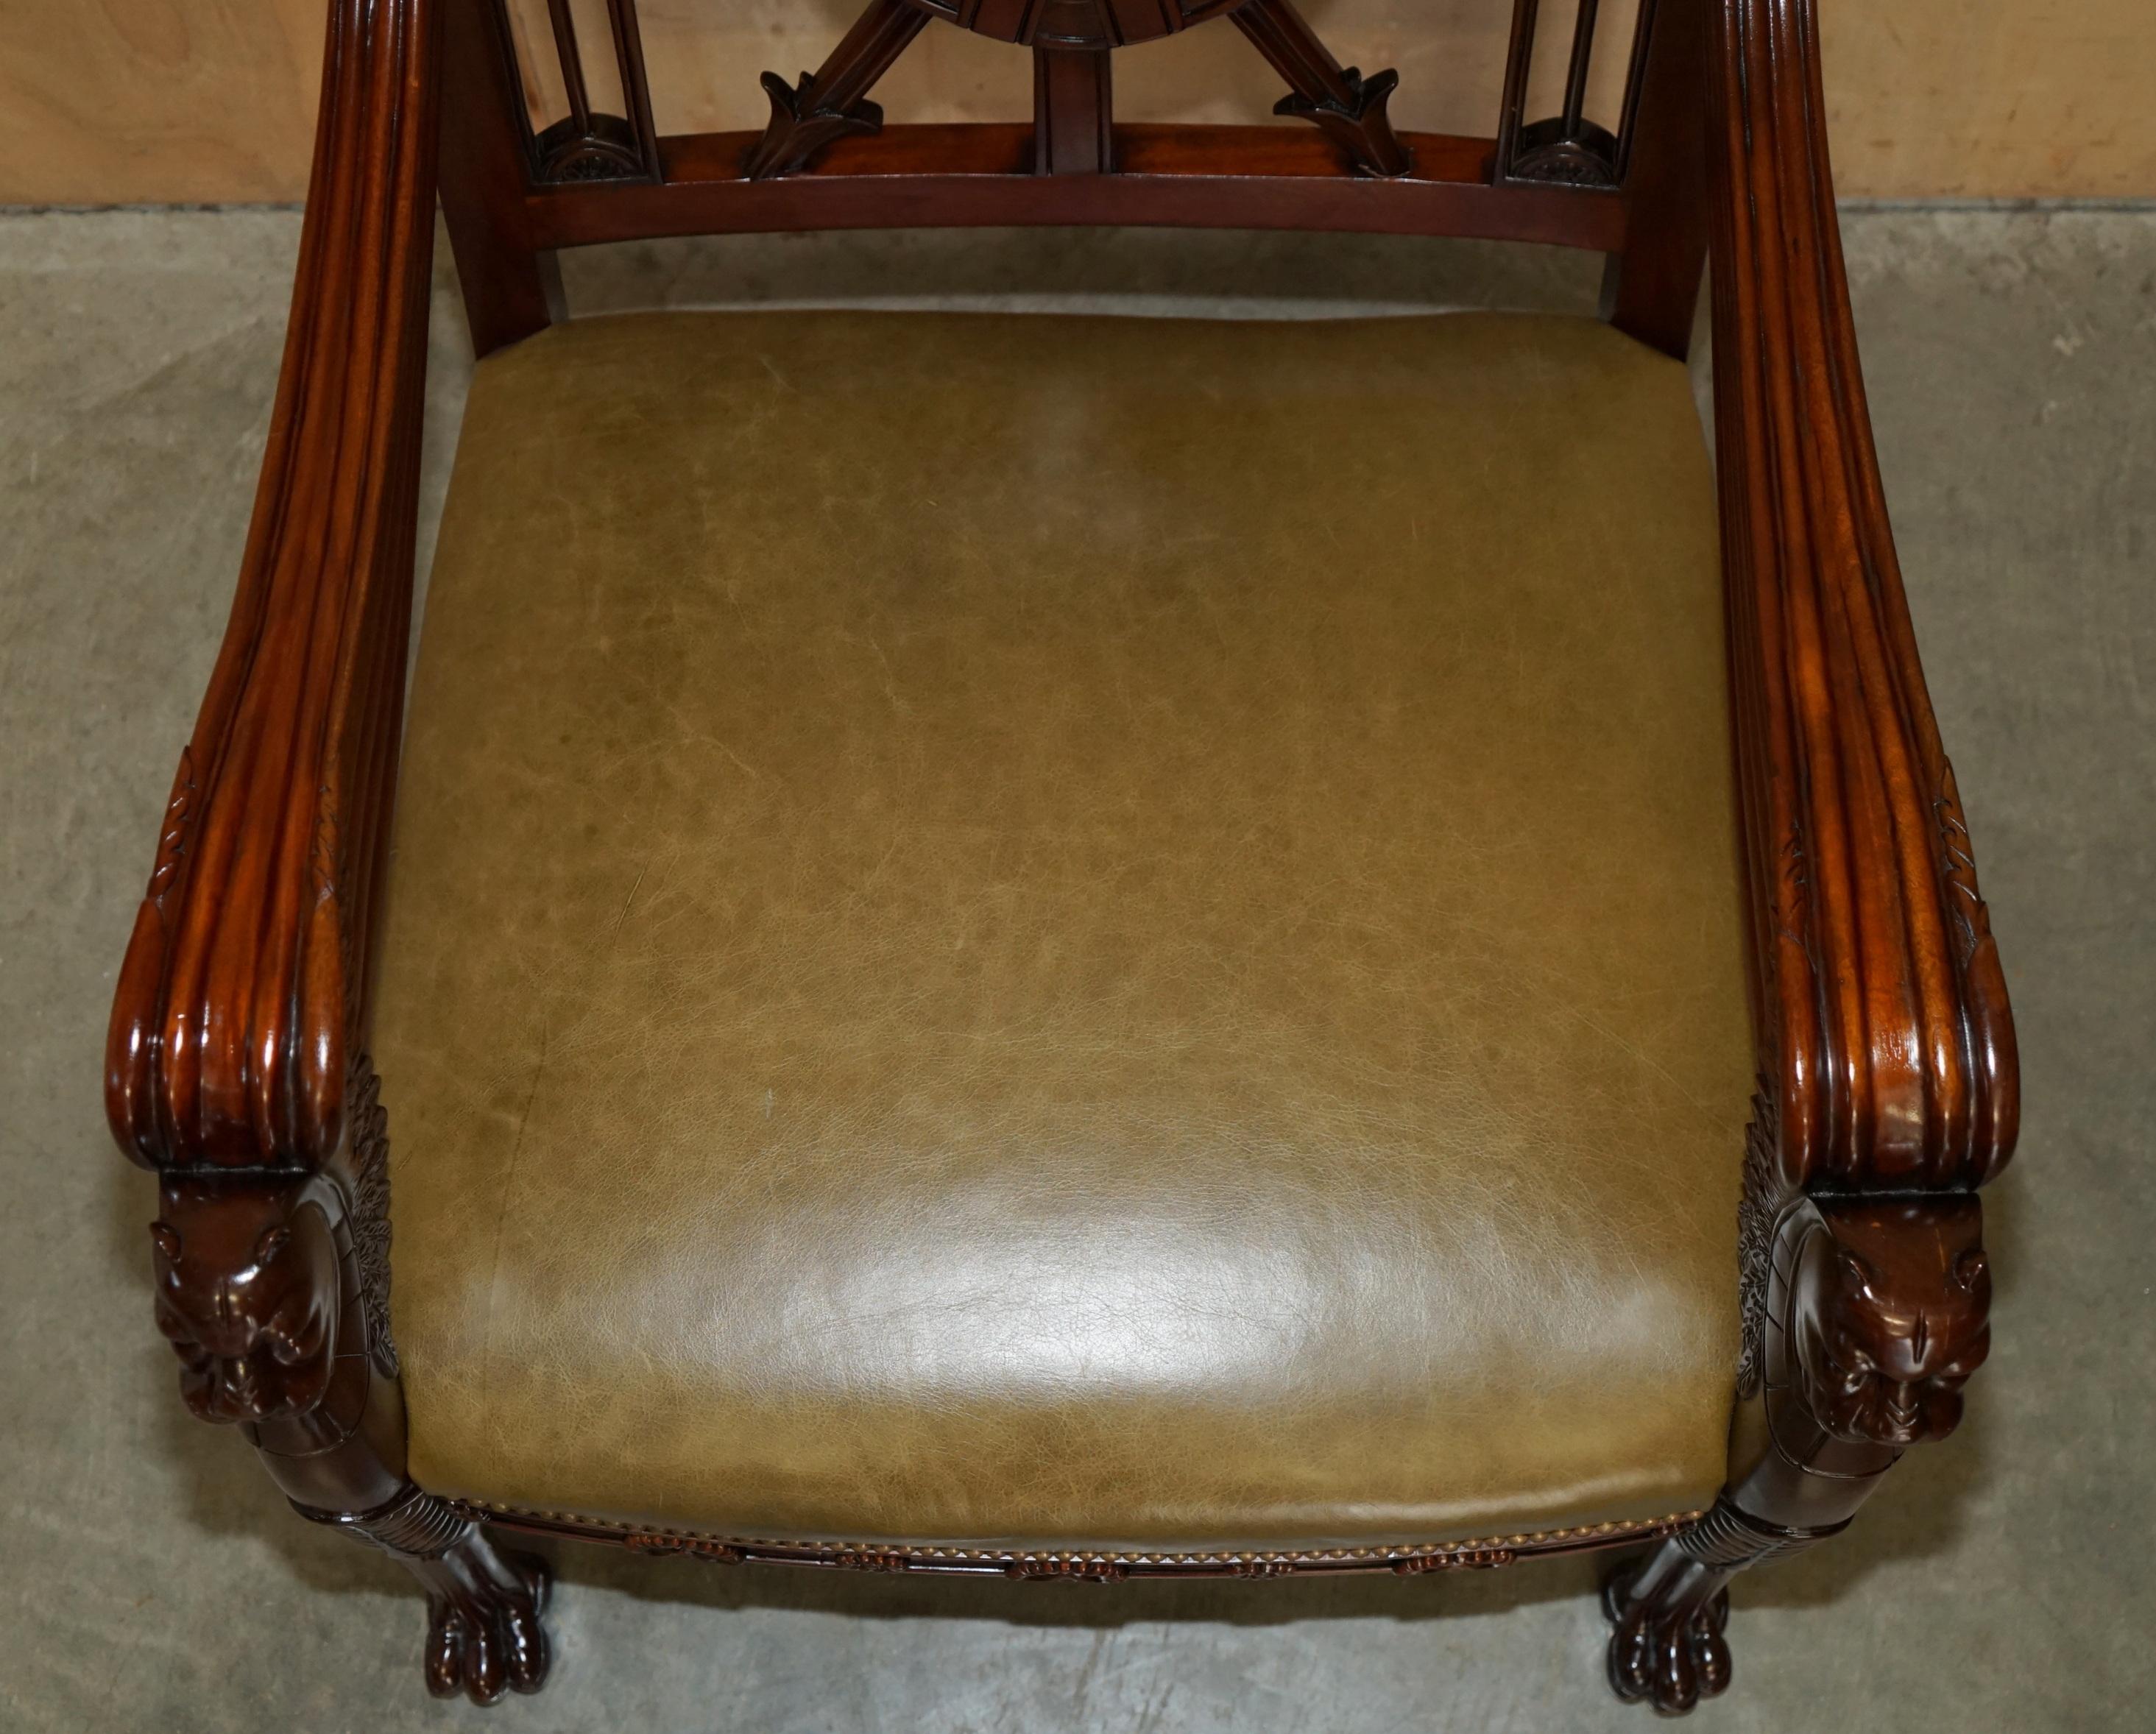 EXQUISITE PAIR OF HAND CARVED HARDWOOD LiBRARY ARMCHAIRS LION GRIFFON WING ARMS For Sale 6